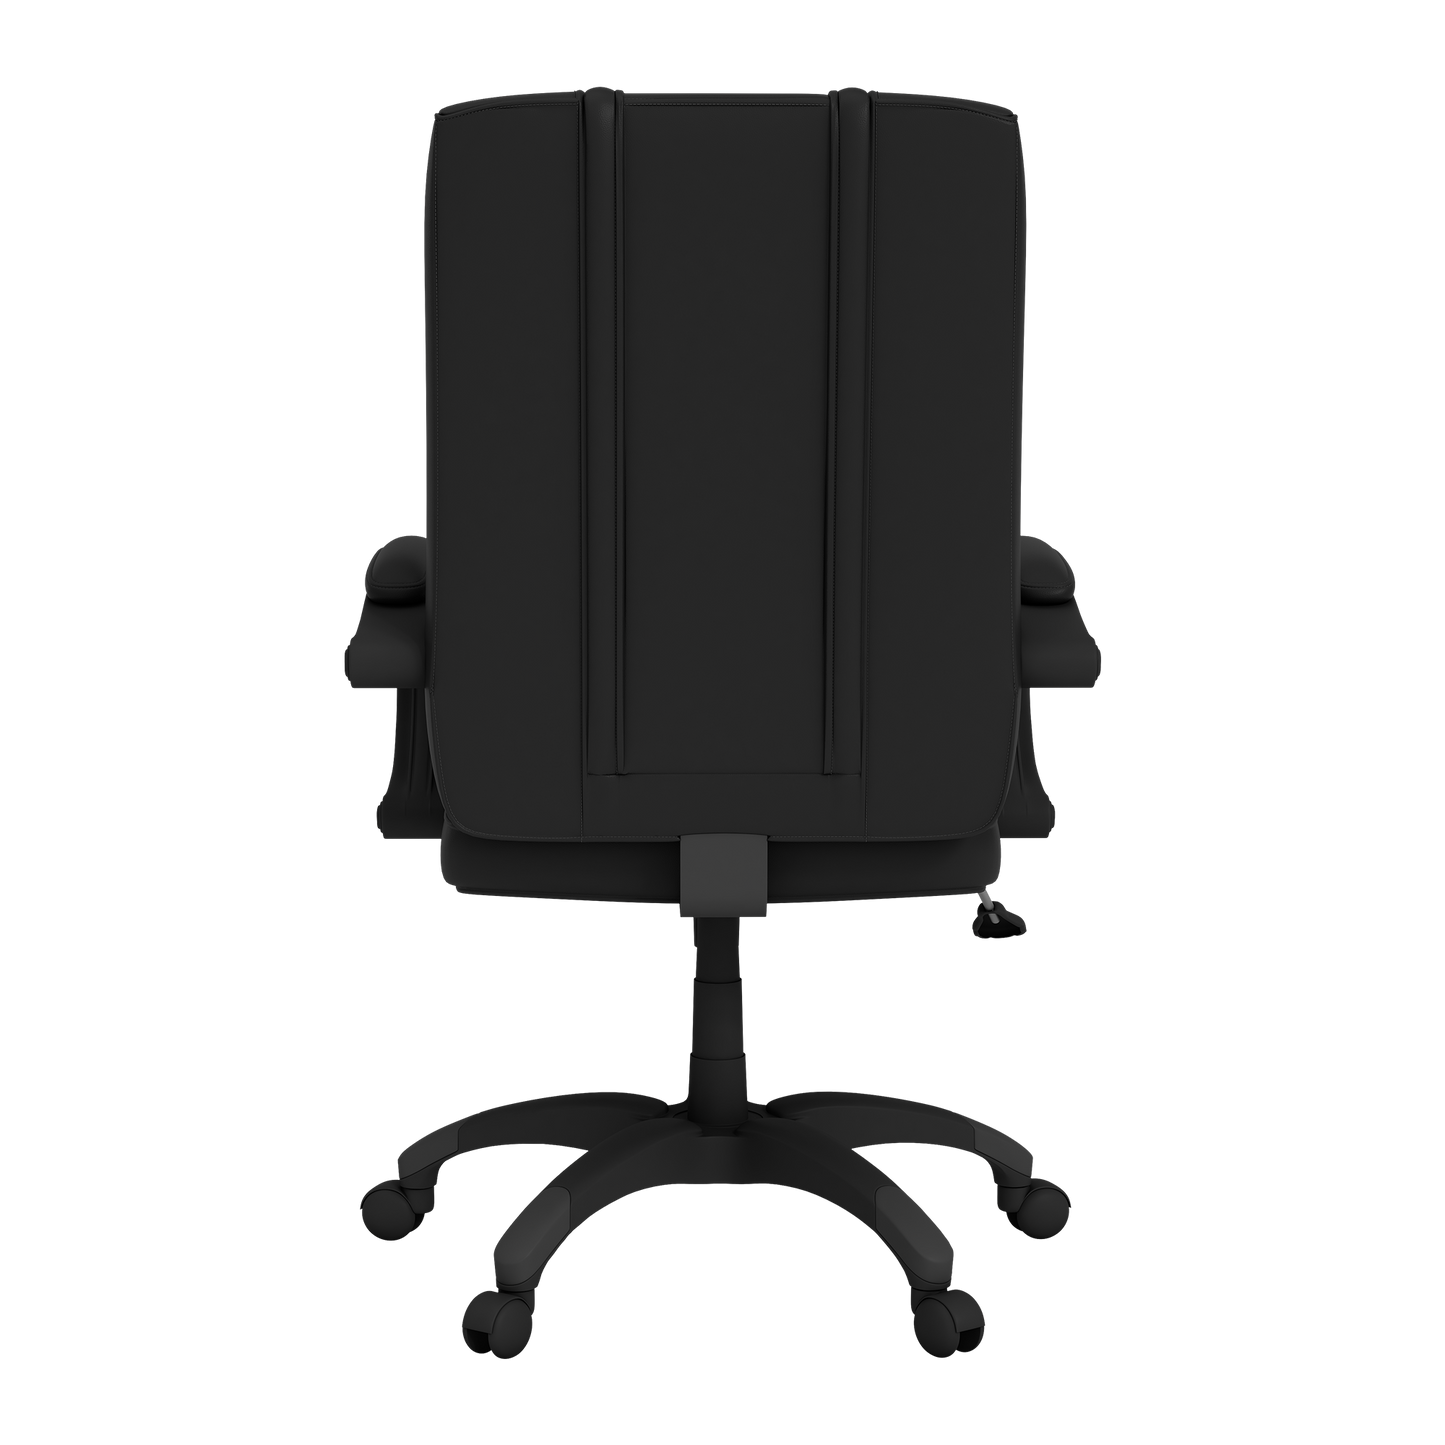 Office Chair 1000 Indiana Pacers Logo